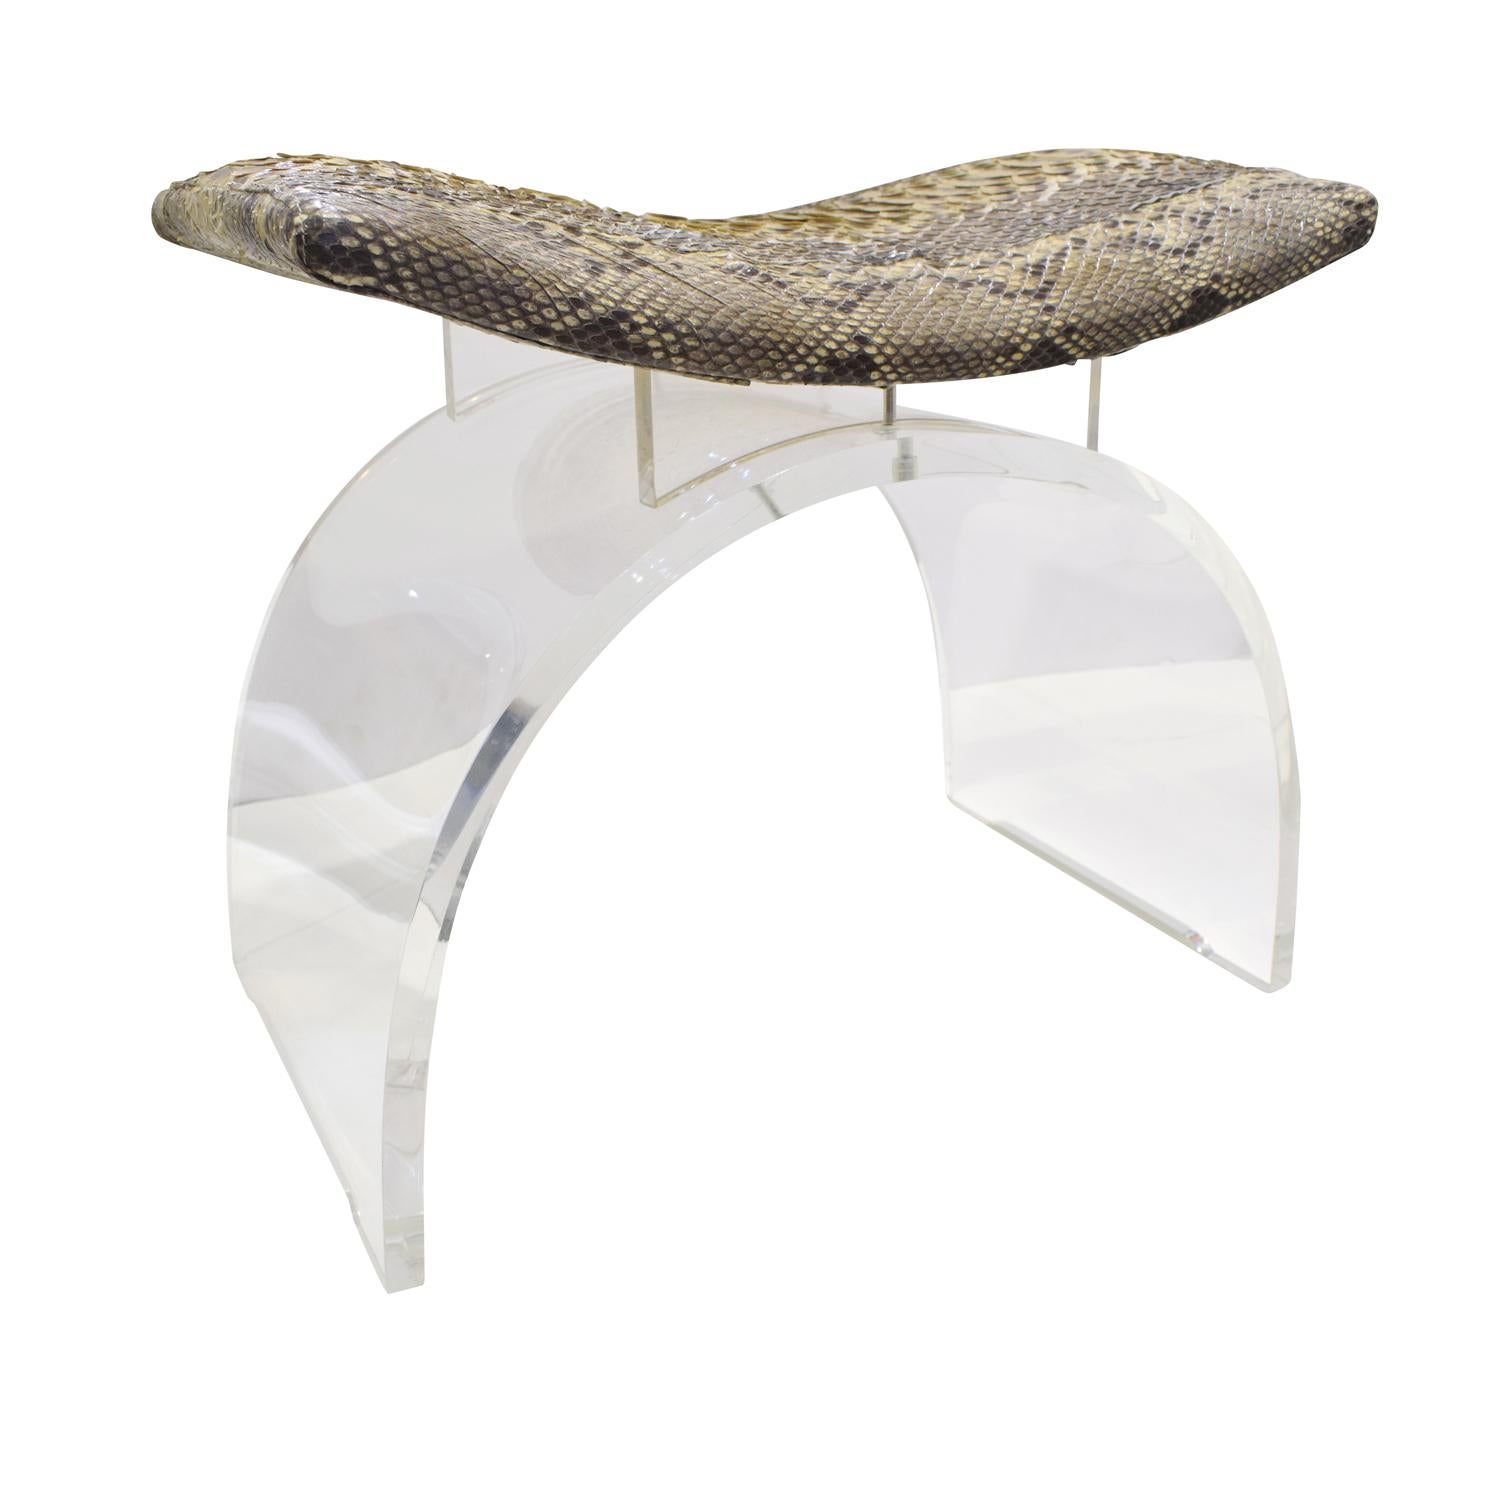 American Chic Bench in Lucite with Python Seat, 1970s